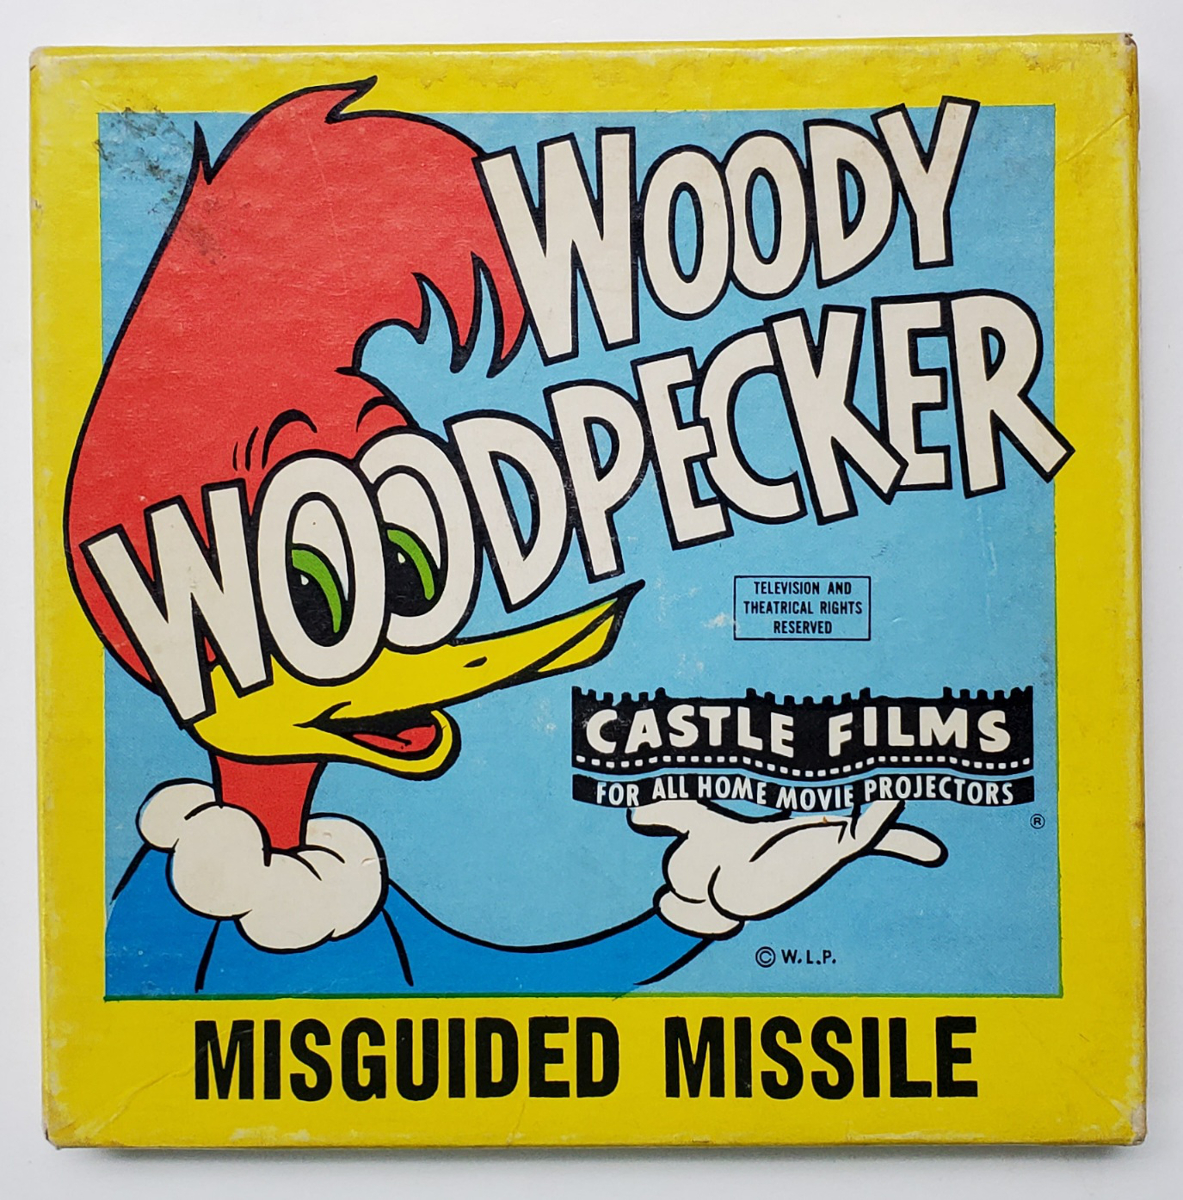 Castle Films Woody Woodpecker #533 Misguided Missile 8 mm Complete Edition Film Reel in the Box 1